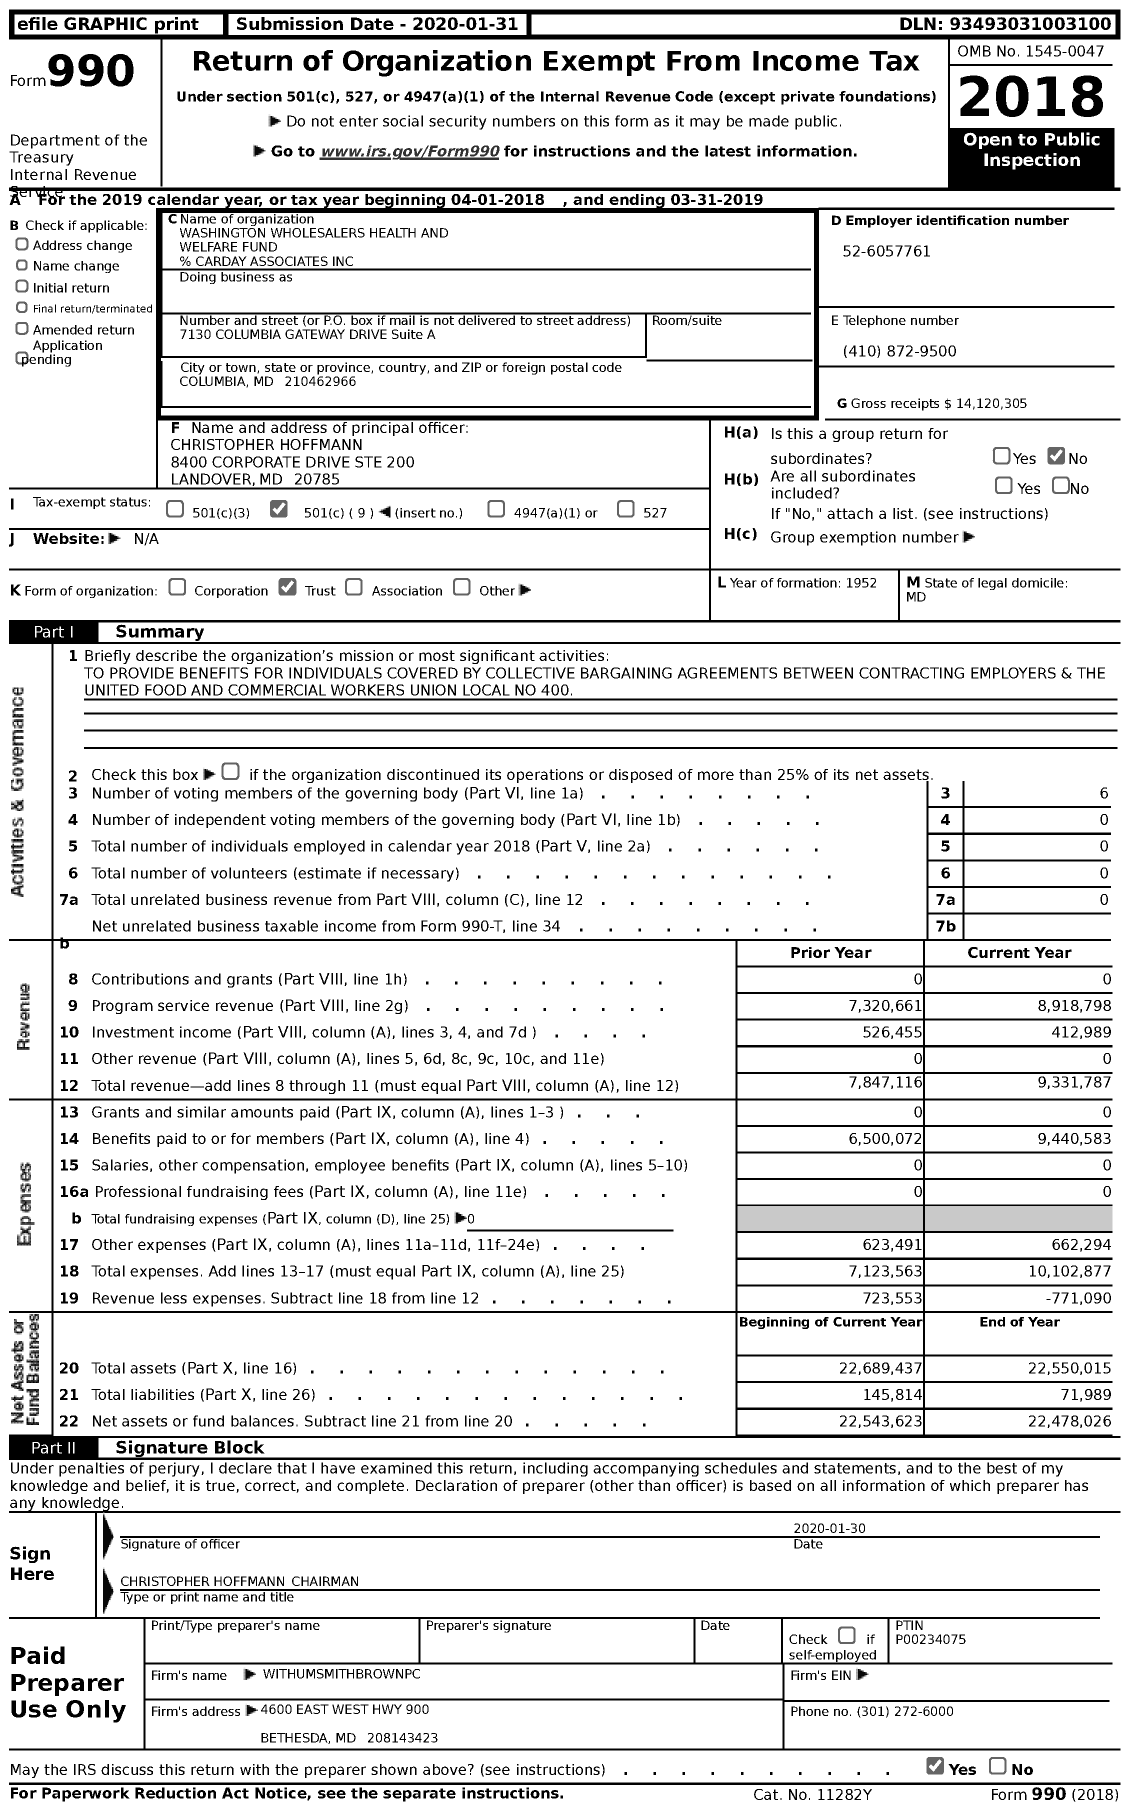 Image of first page of 2018 Form 990 for Washington Wholesalers Health and Welfare Fund